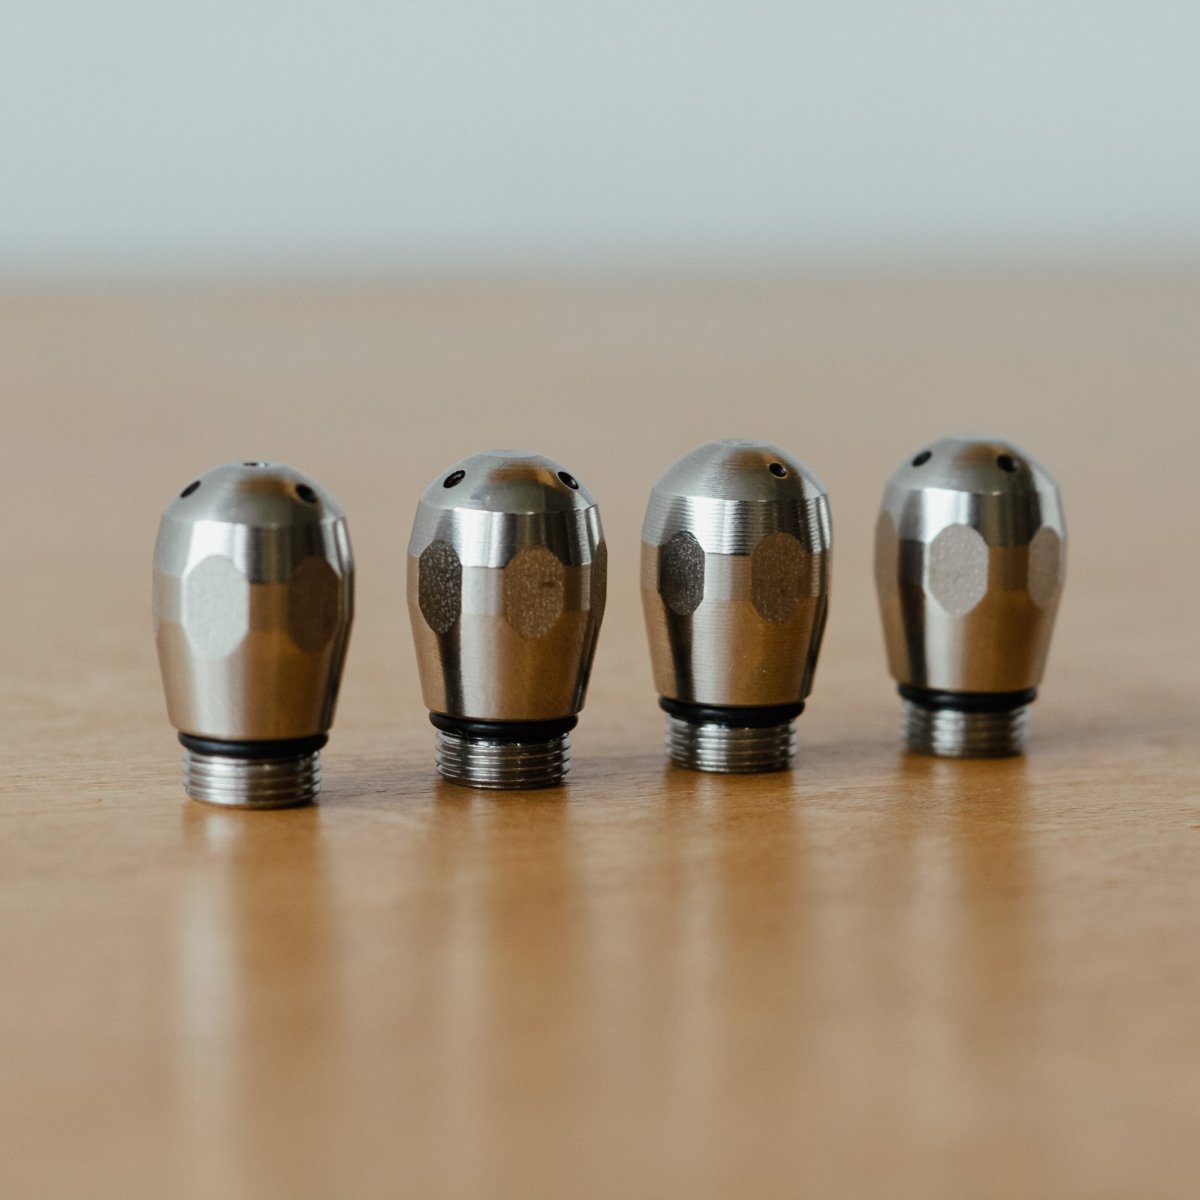 Set of 4 Rocket Stainless steam nozzle